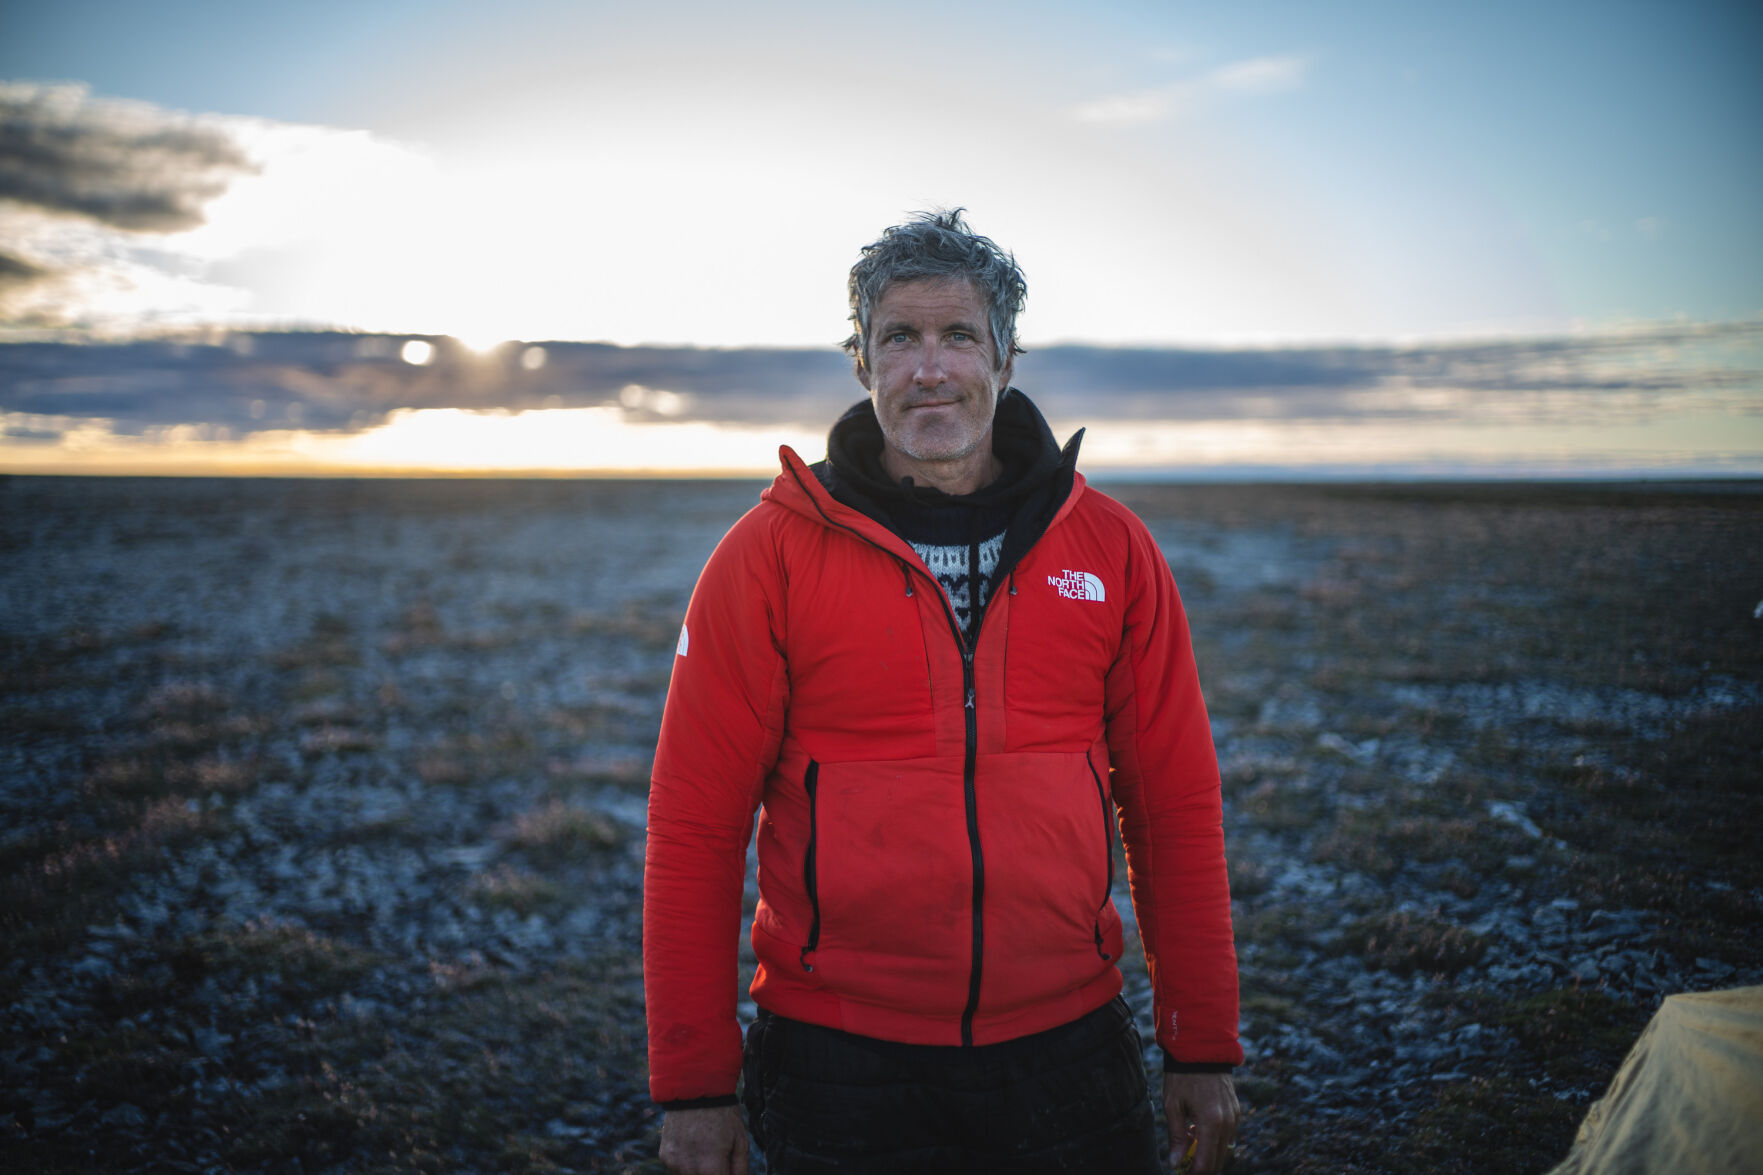 TV Talk exclusive: Renan Ozturk retraces the fated HMS